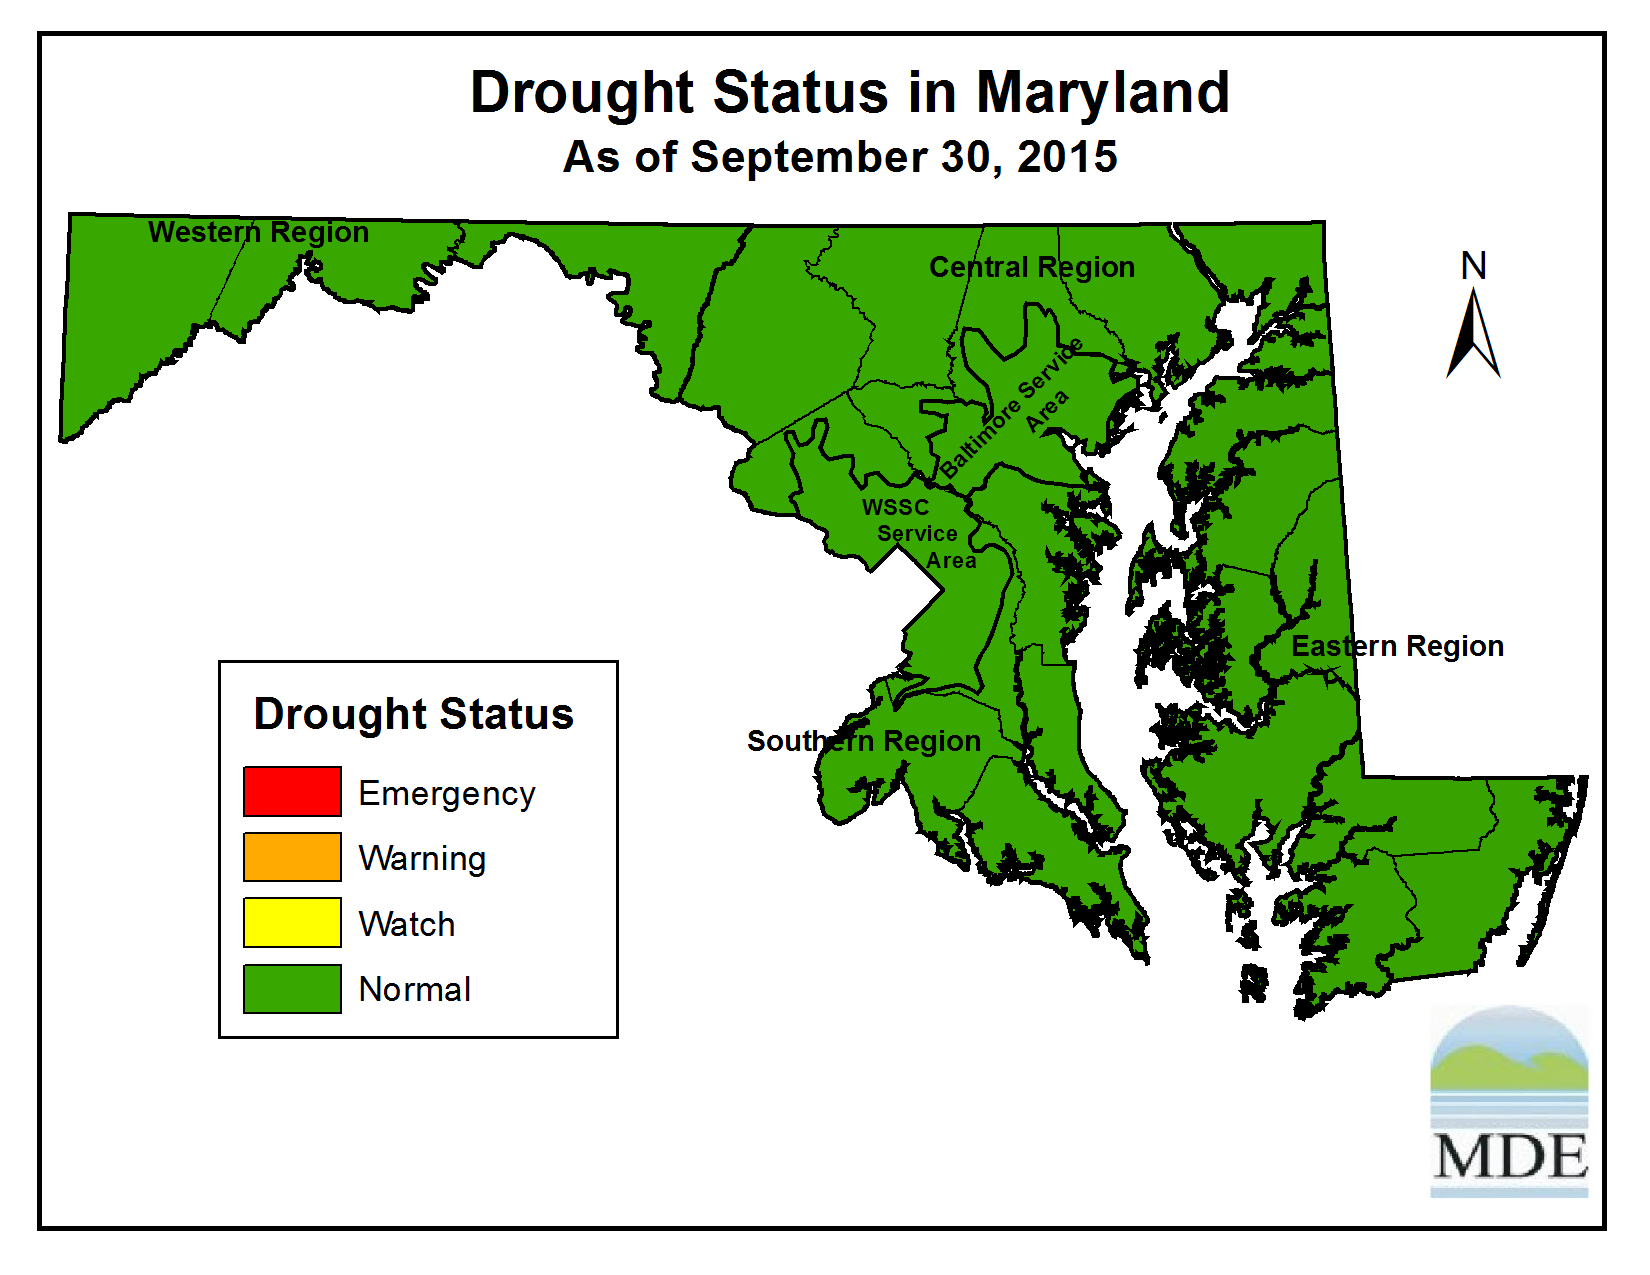 Drought Status as of September 30, 2015